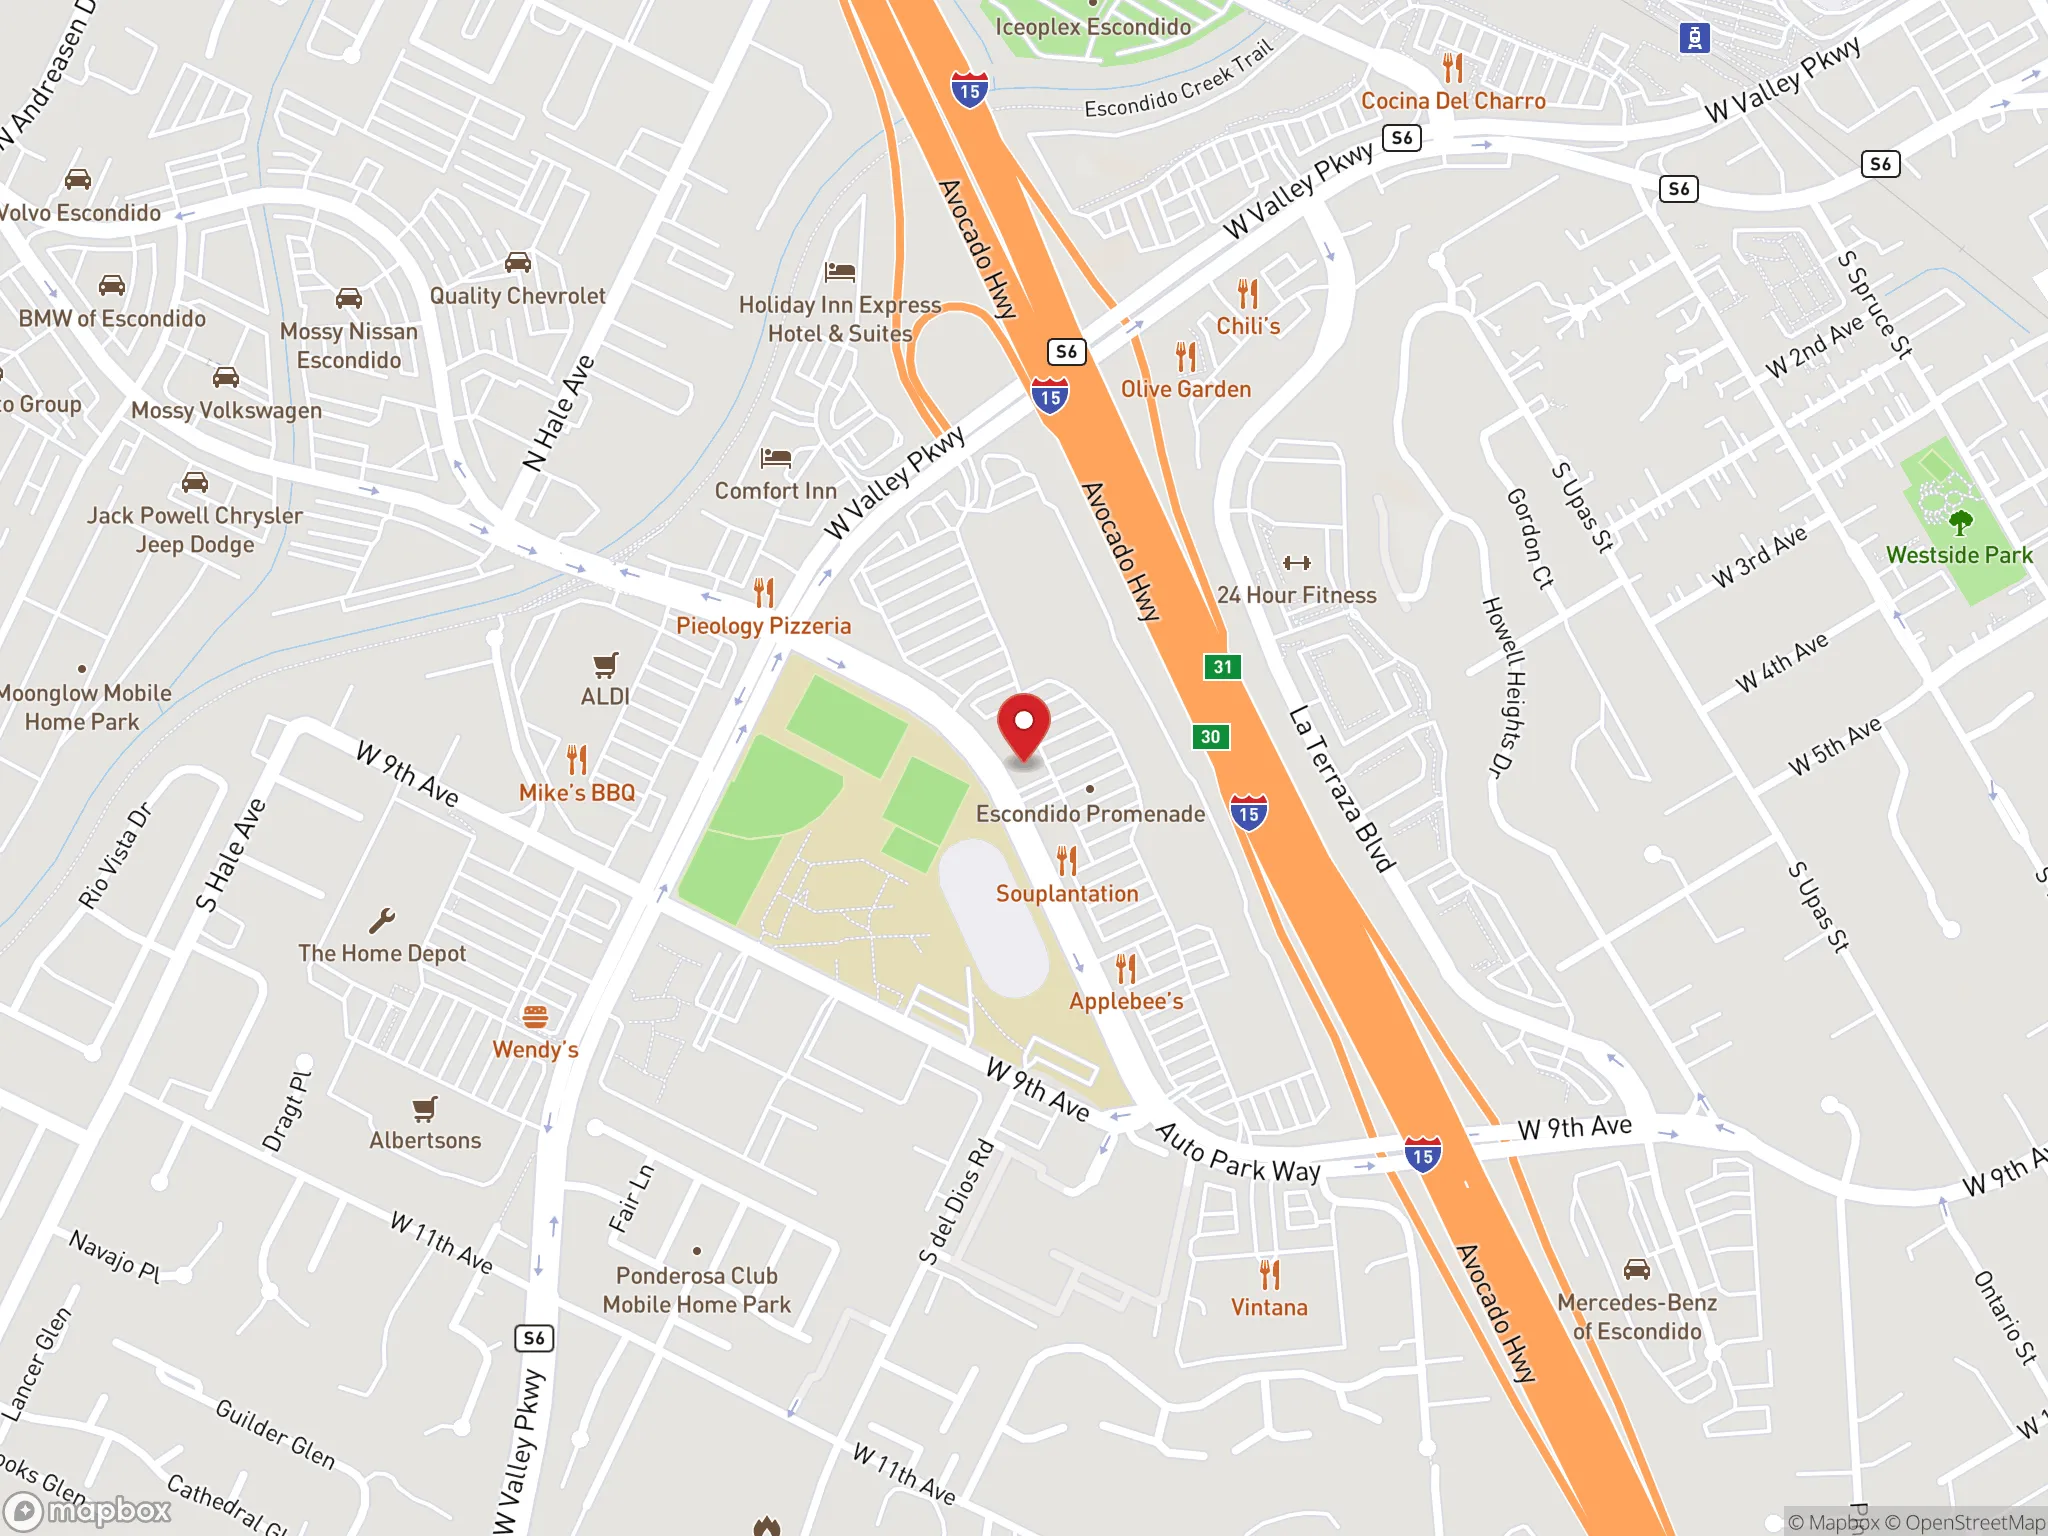 Map showing location of Dave's Hot Chicken restaurant in Escondido, California.